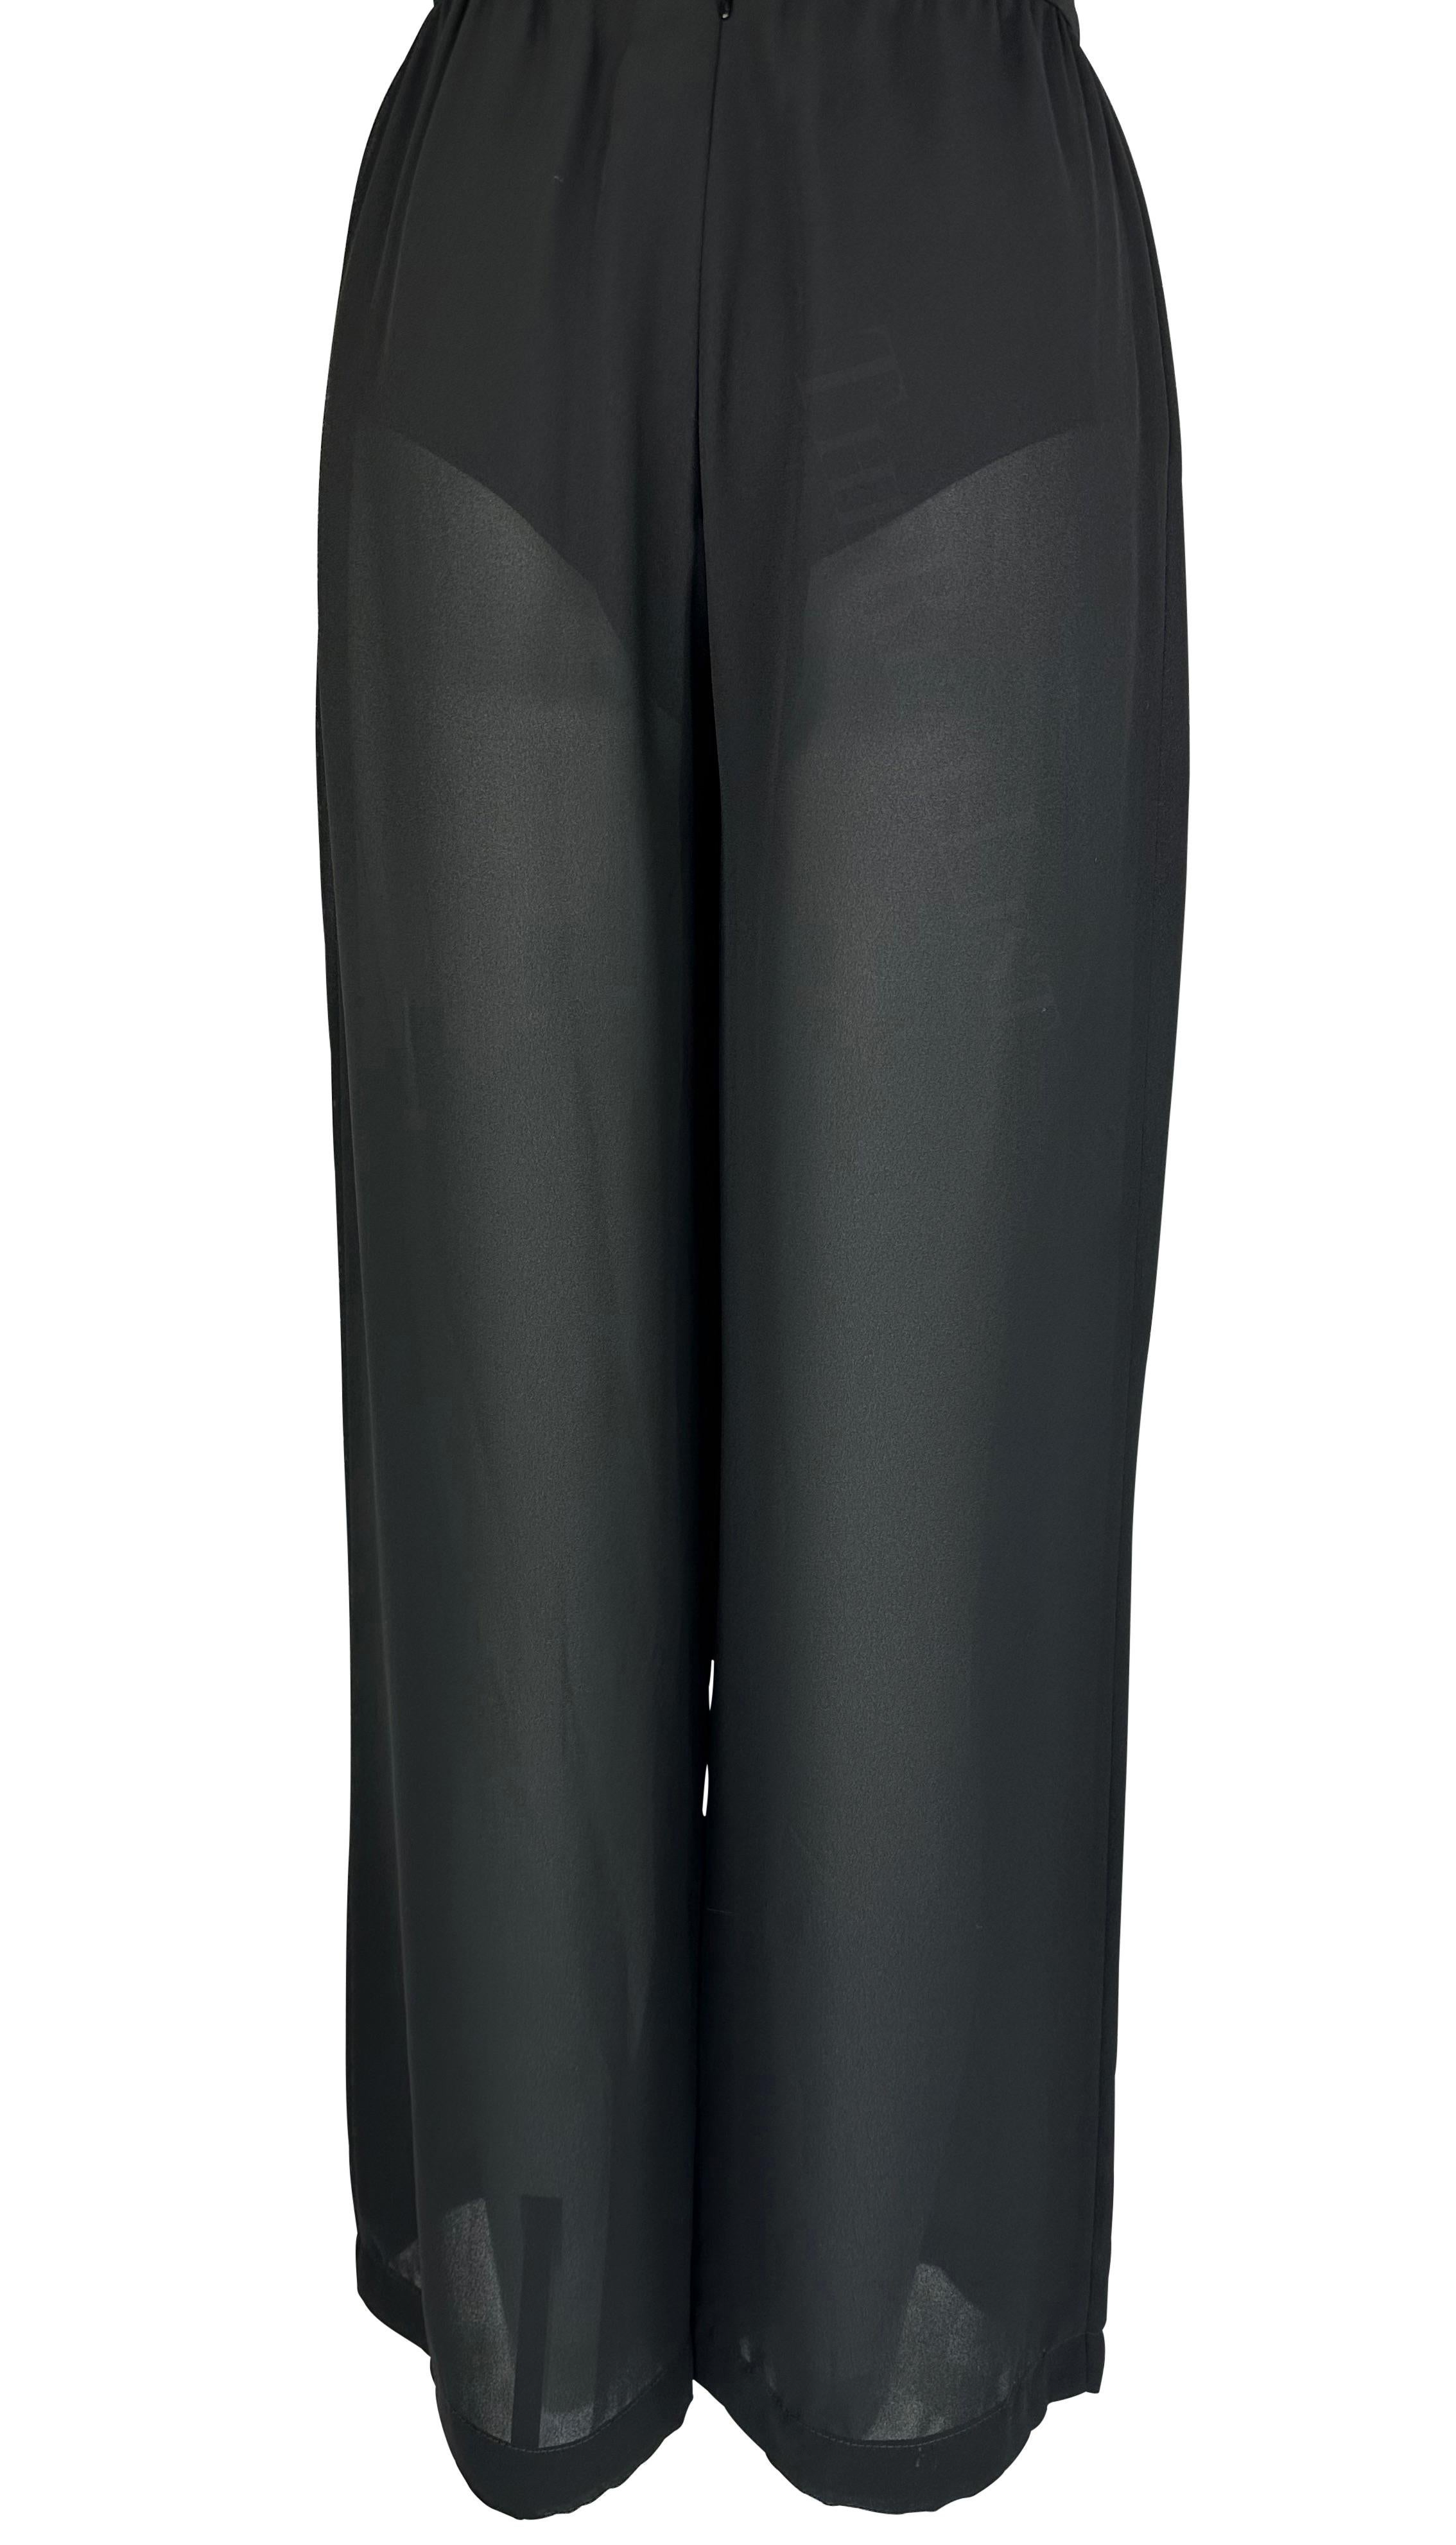 Cruise 1999 Thierry Mugler Sheer Black Lingerie Style Wide Leg High Waist Pants For Sale 1